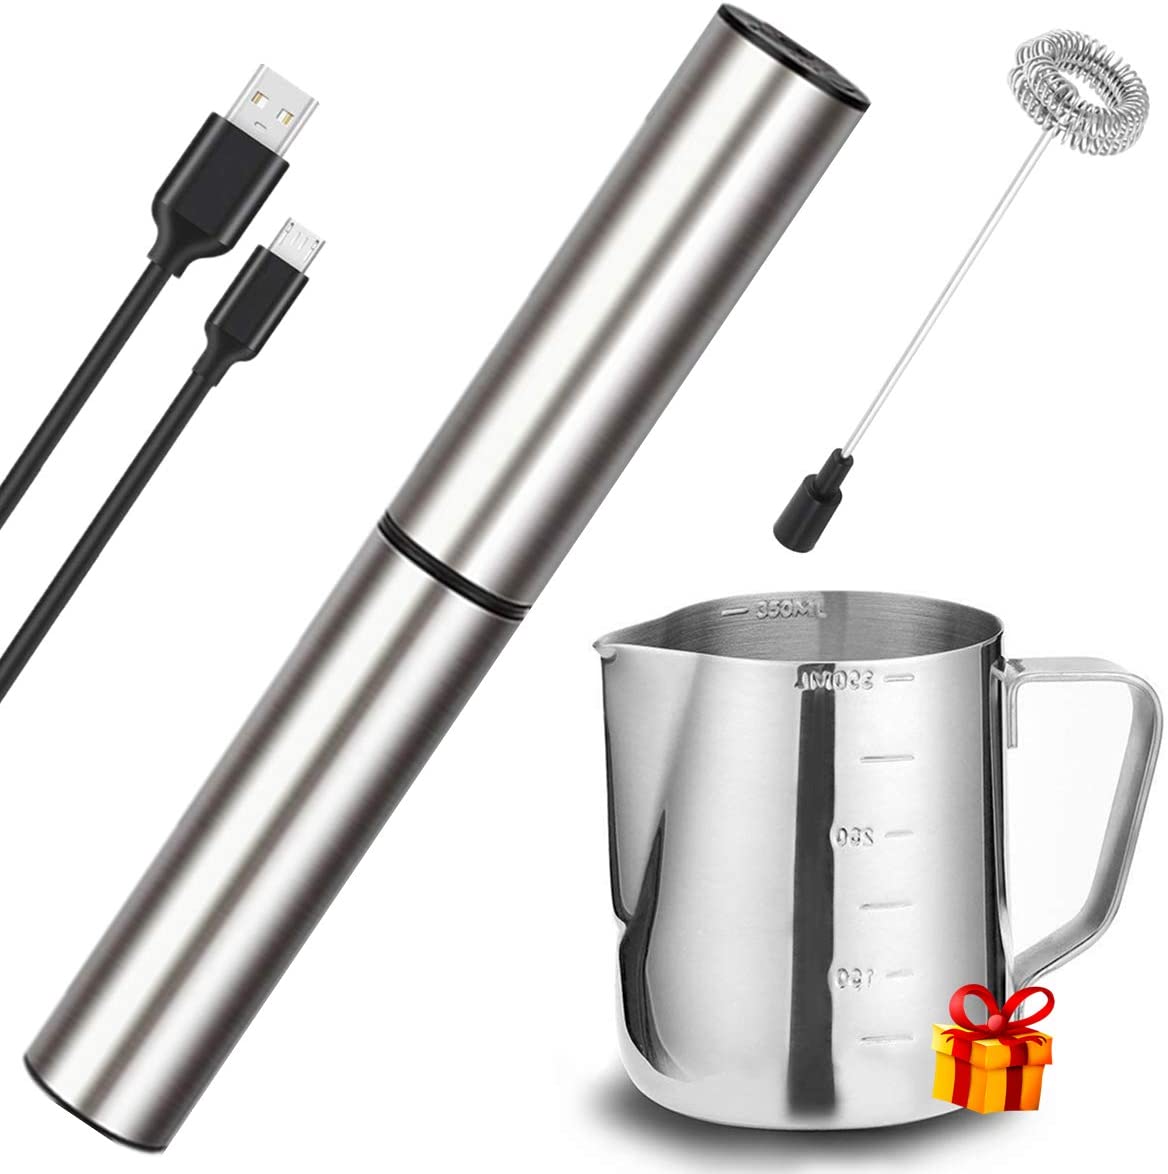 https://www.dontwasteyourmoney.com/wp-content/uploads/2020/09/basecent-electric-rechargeable-milk-frother-handheld-milk-frother.jpg